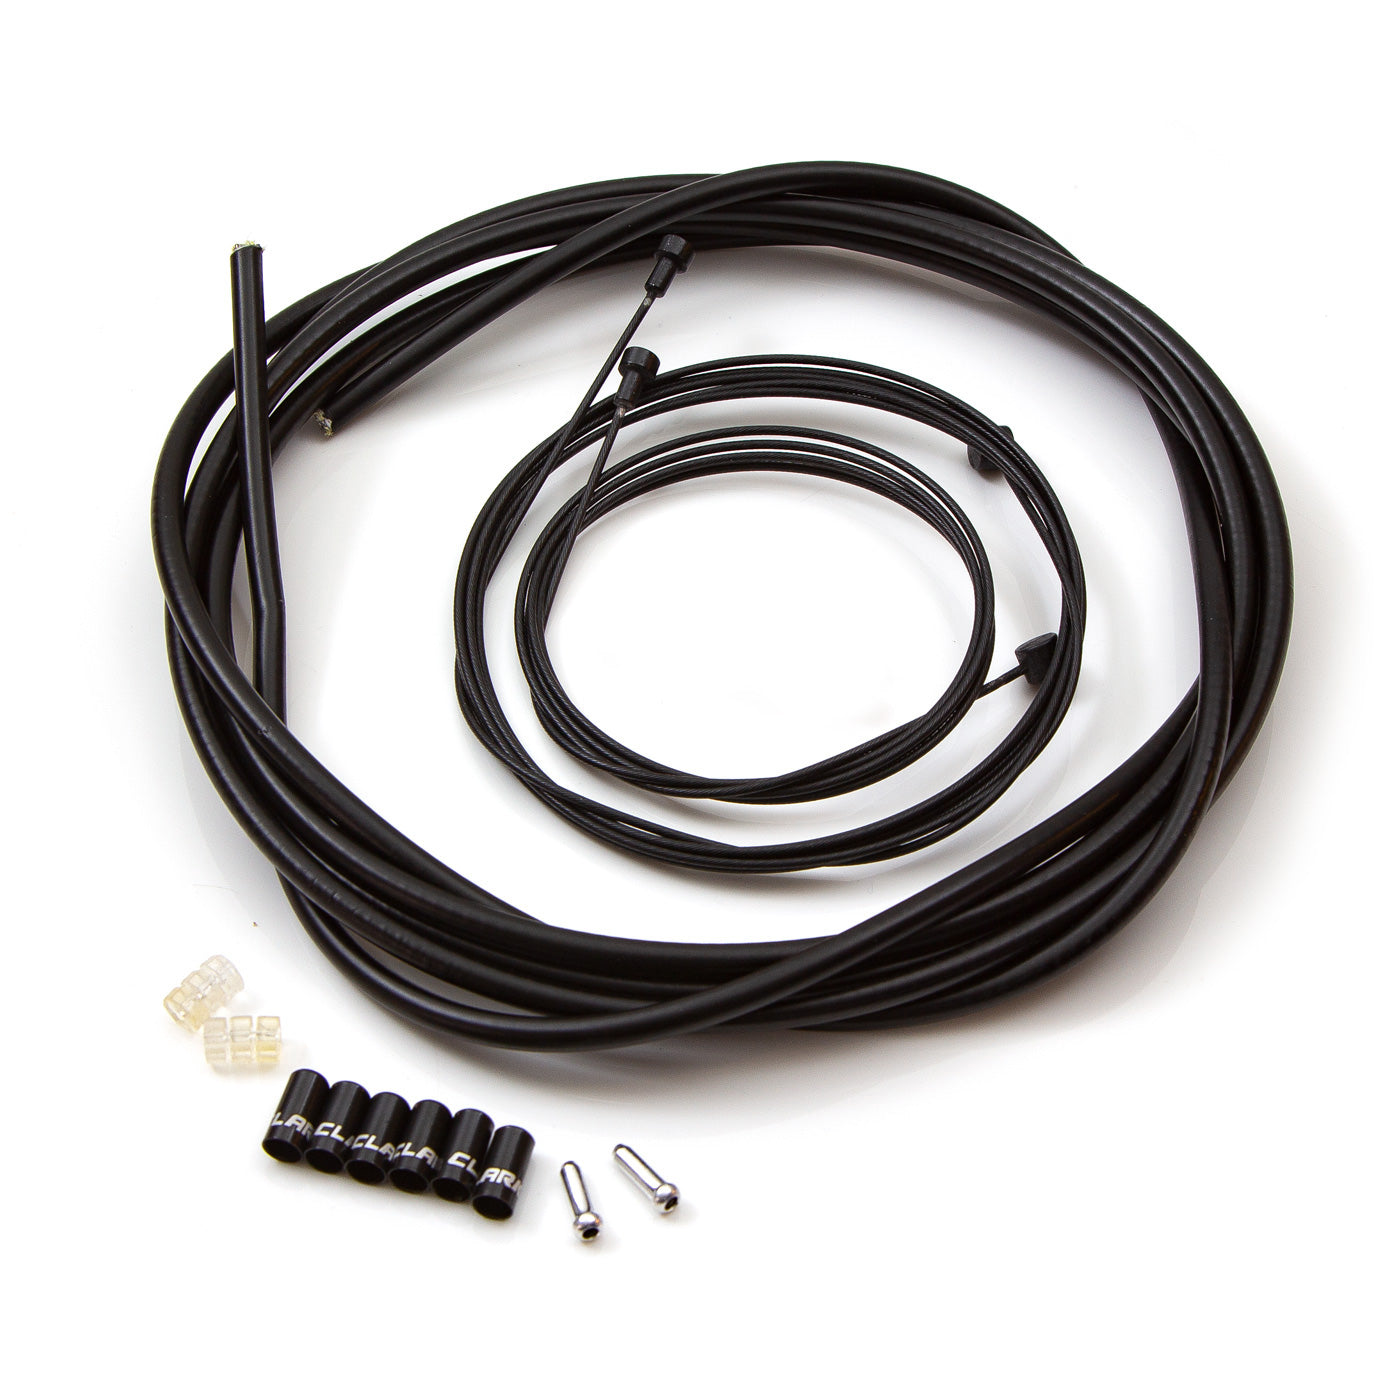 View Clarks Lightweight Alloy Housing Brake Cable Kit White information